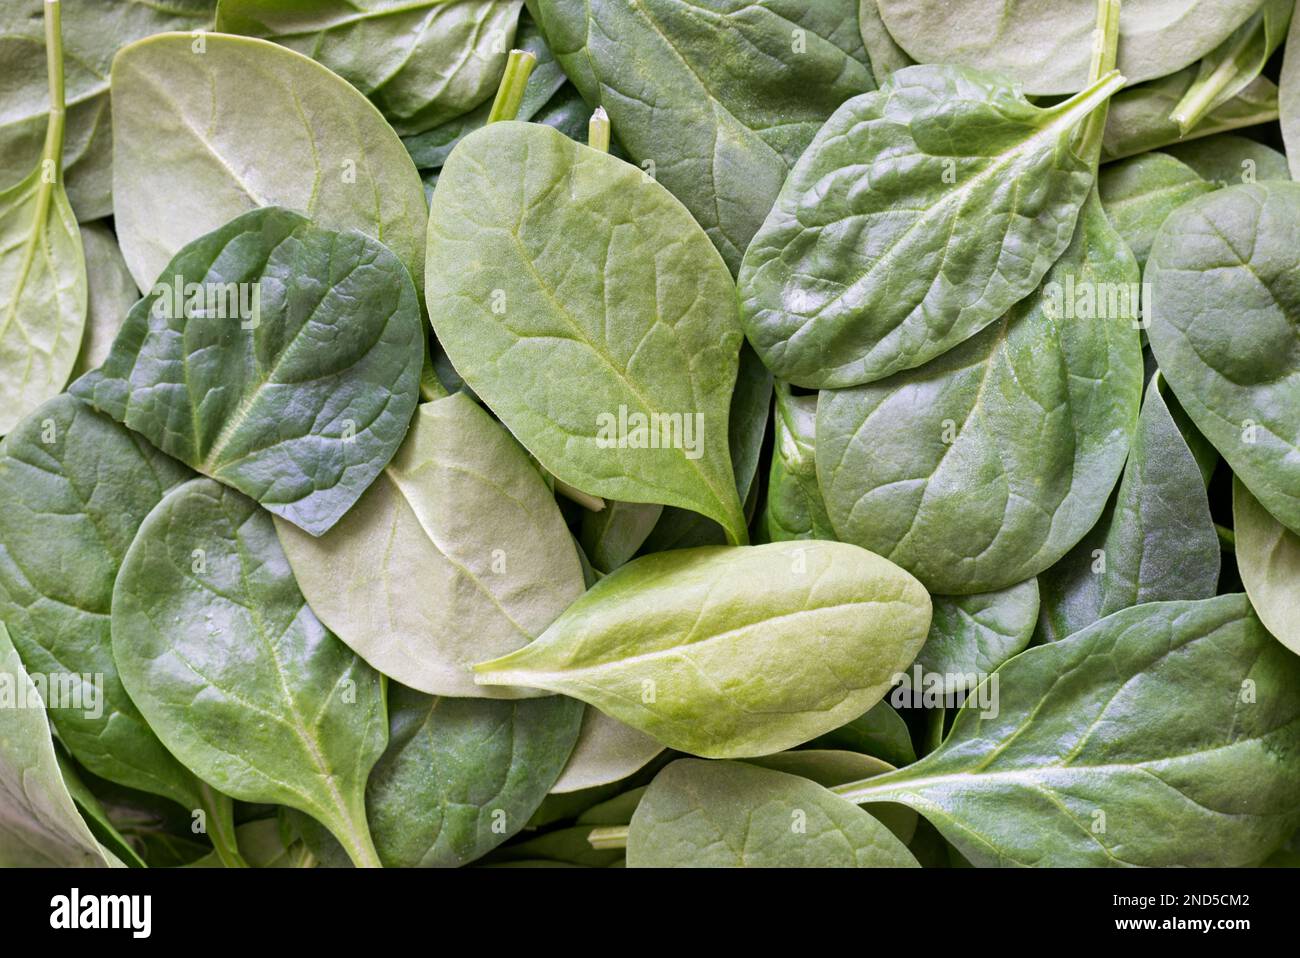 Baby spinach leaves loosely scattered. Raw leafy green vegetables directly above, full frame image. Stock Photo